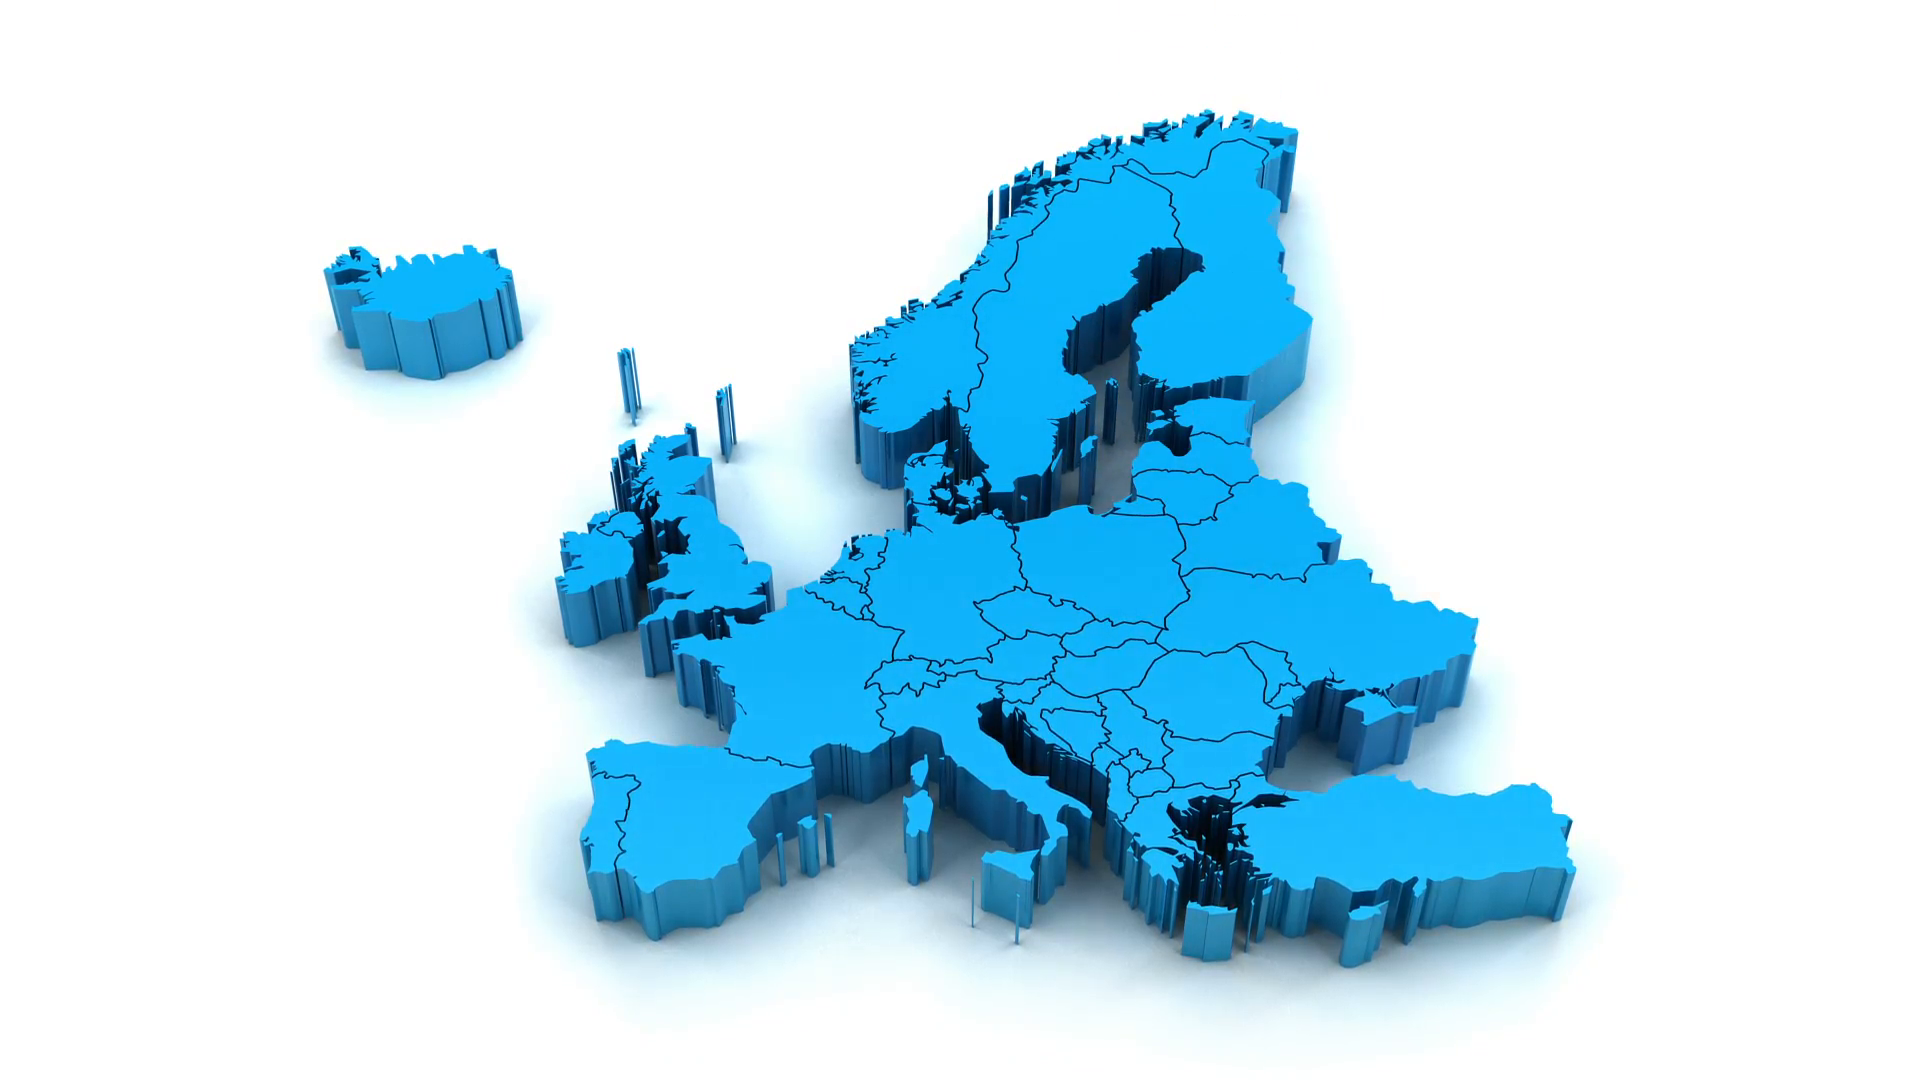 3 animation of europe map formed by individual countries